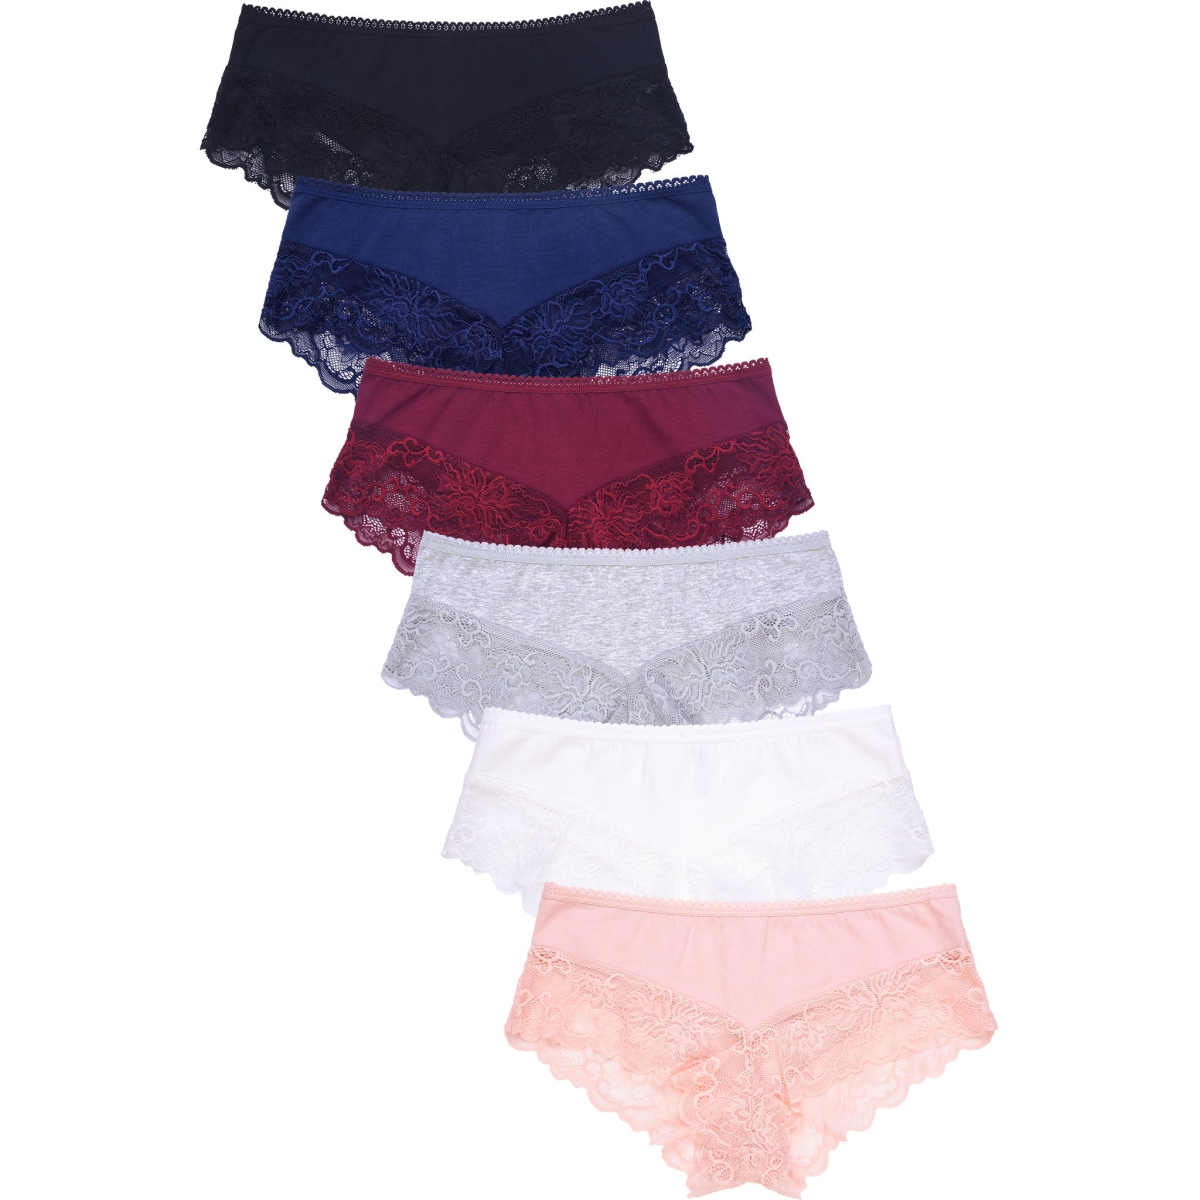 Picture of 247 Frenzy 247-LP1408CH2-XL Womens Essentials Cotton Stretch Hipster Panty Underwear - Assorted Color - Extra Large - Pack of 6